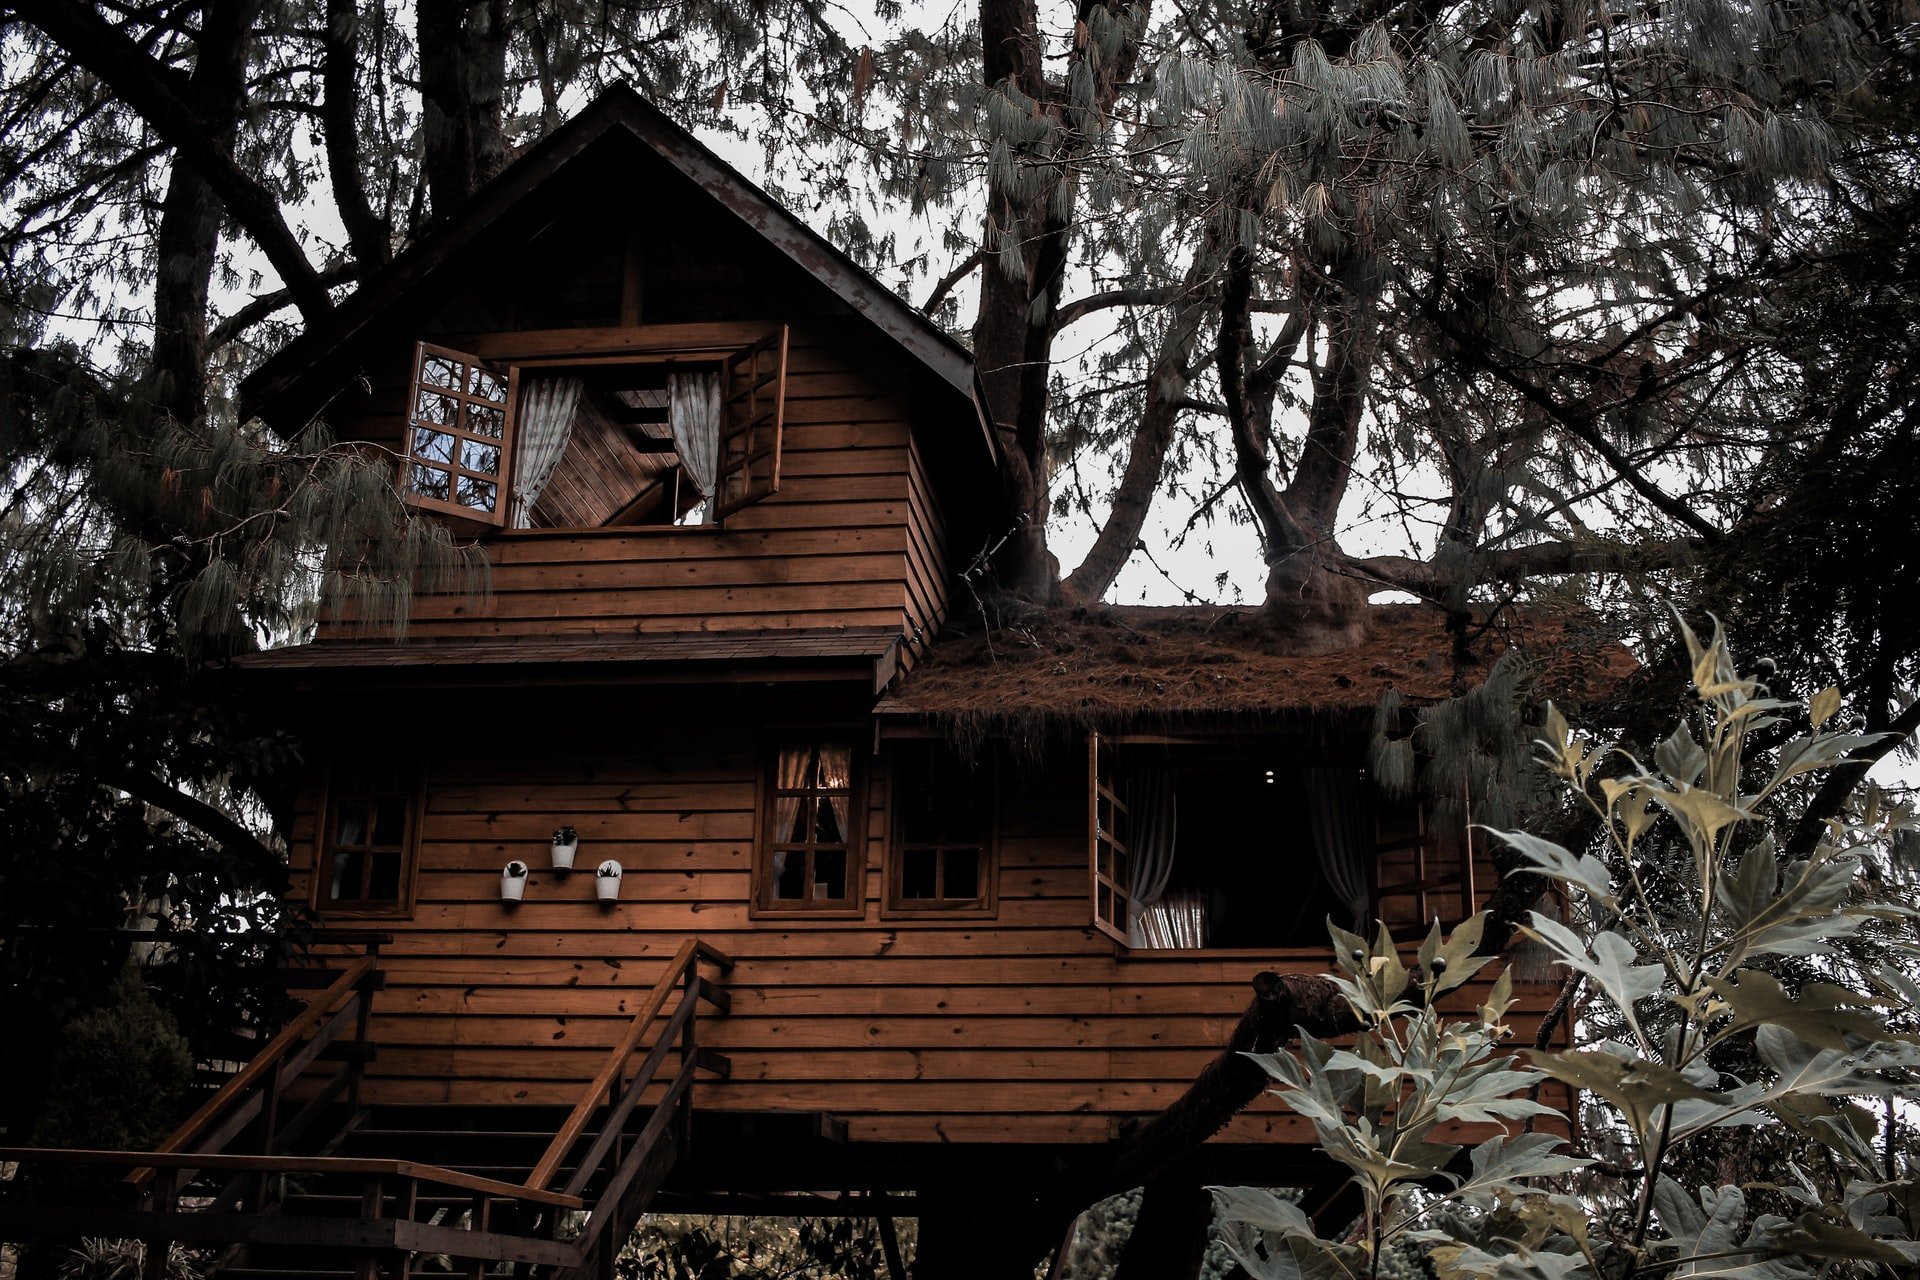 Other users said OP was at fault for making her son sleep in the tree house | Source: Unsplash